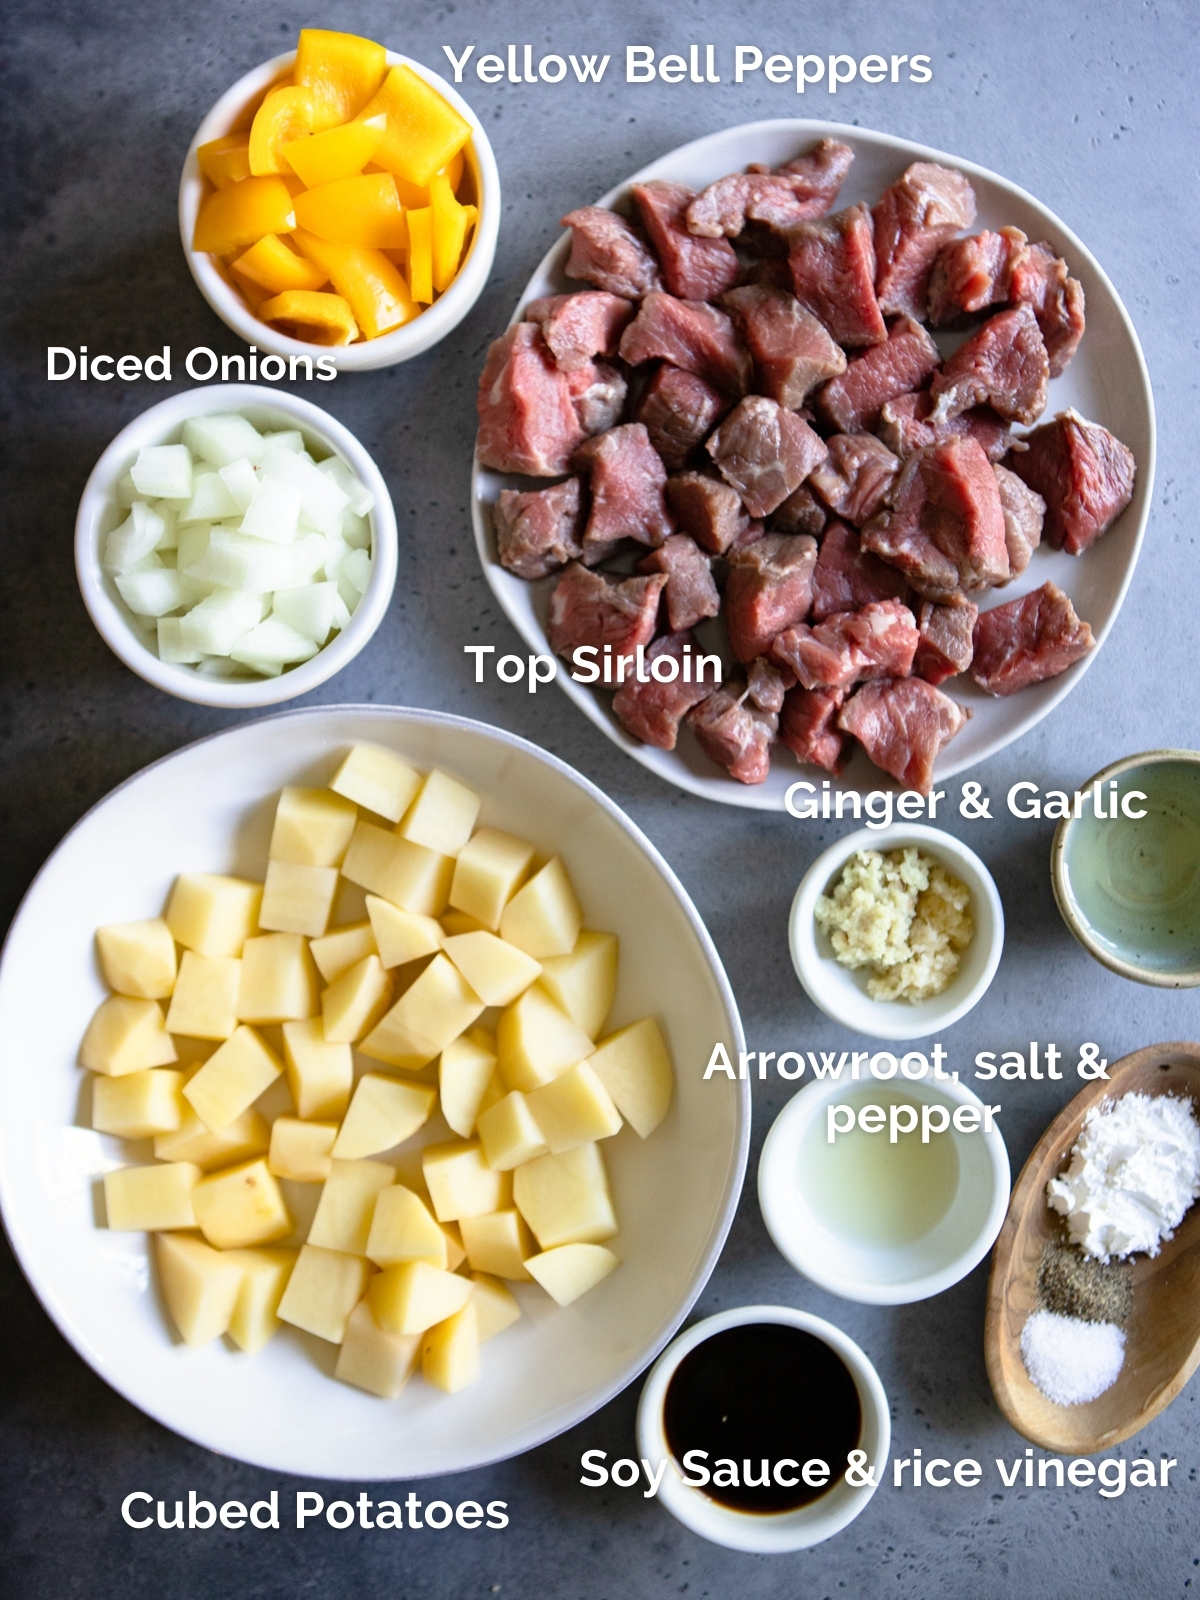 ingredients for a beef and potato dish spread out on a gray background